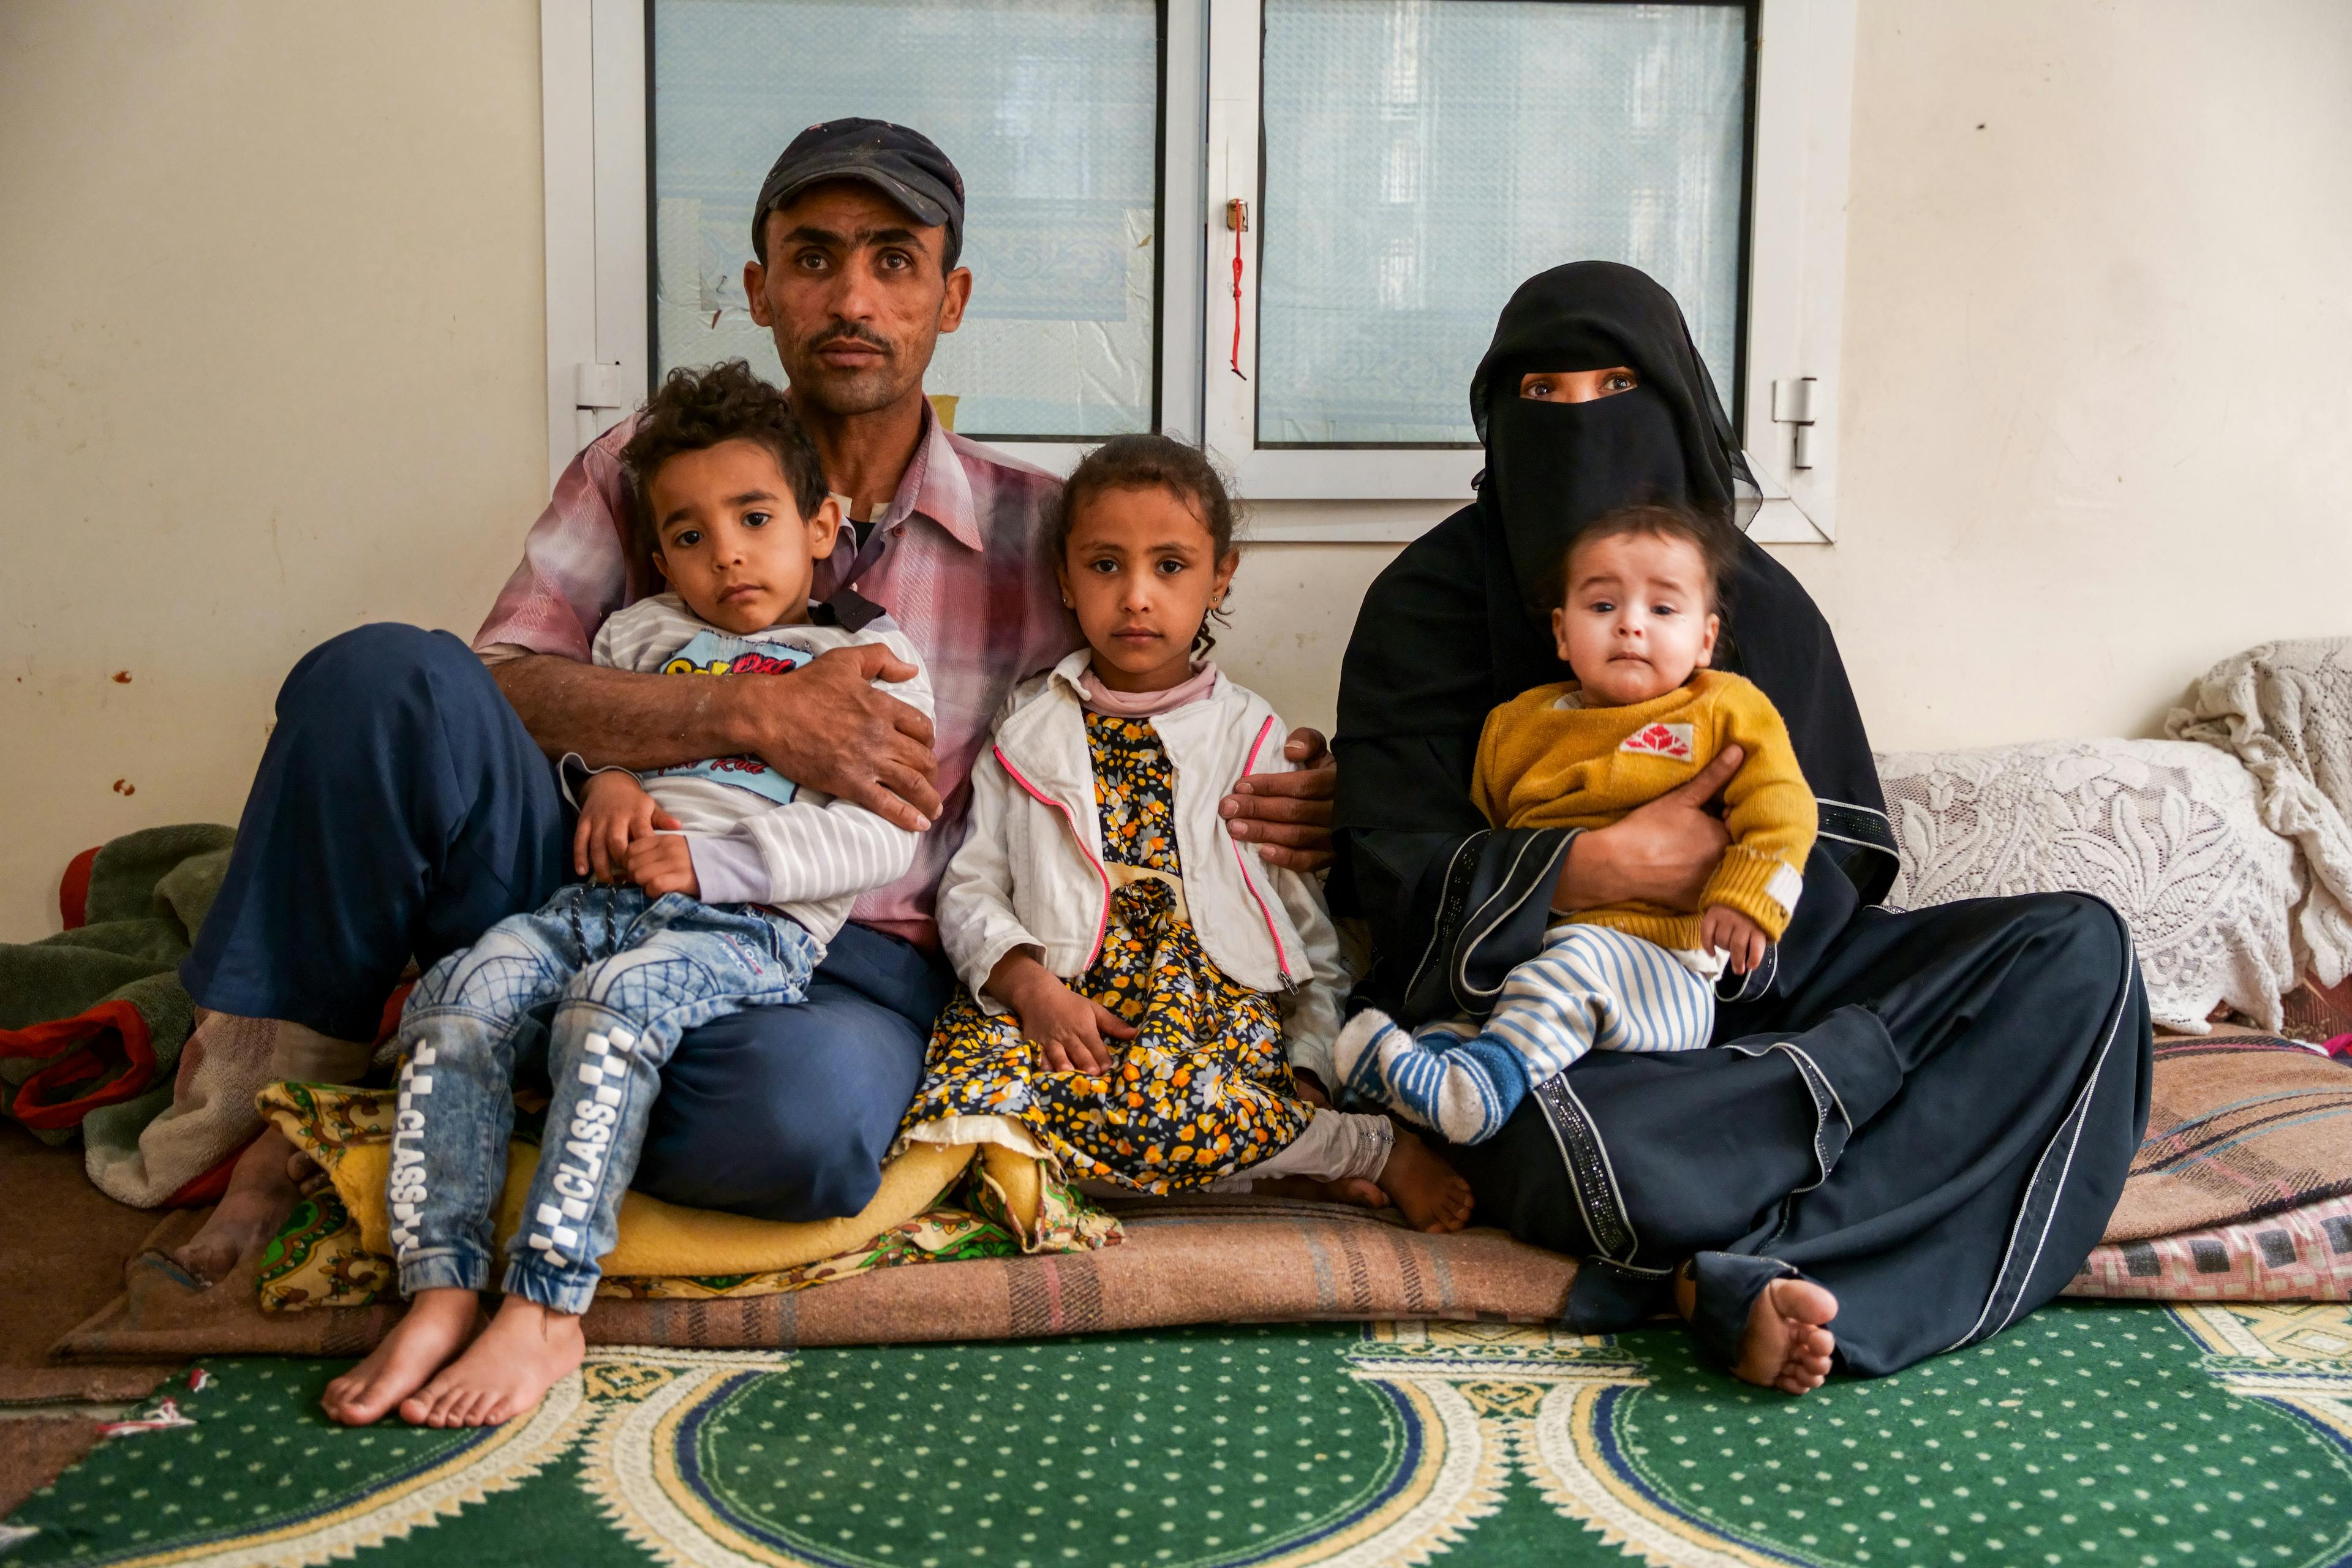 Nabil sits with his wife Salma and their children Mayar, Mohammed, and Ahmed in their apartment located in Dhamar Governorate, Yemen.